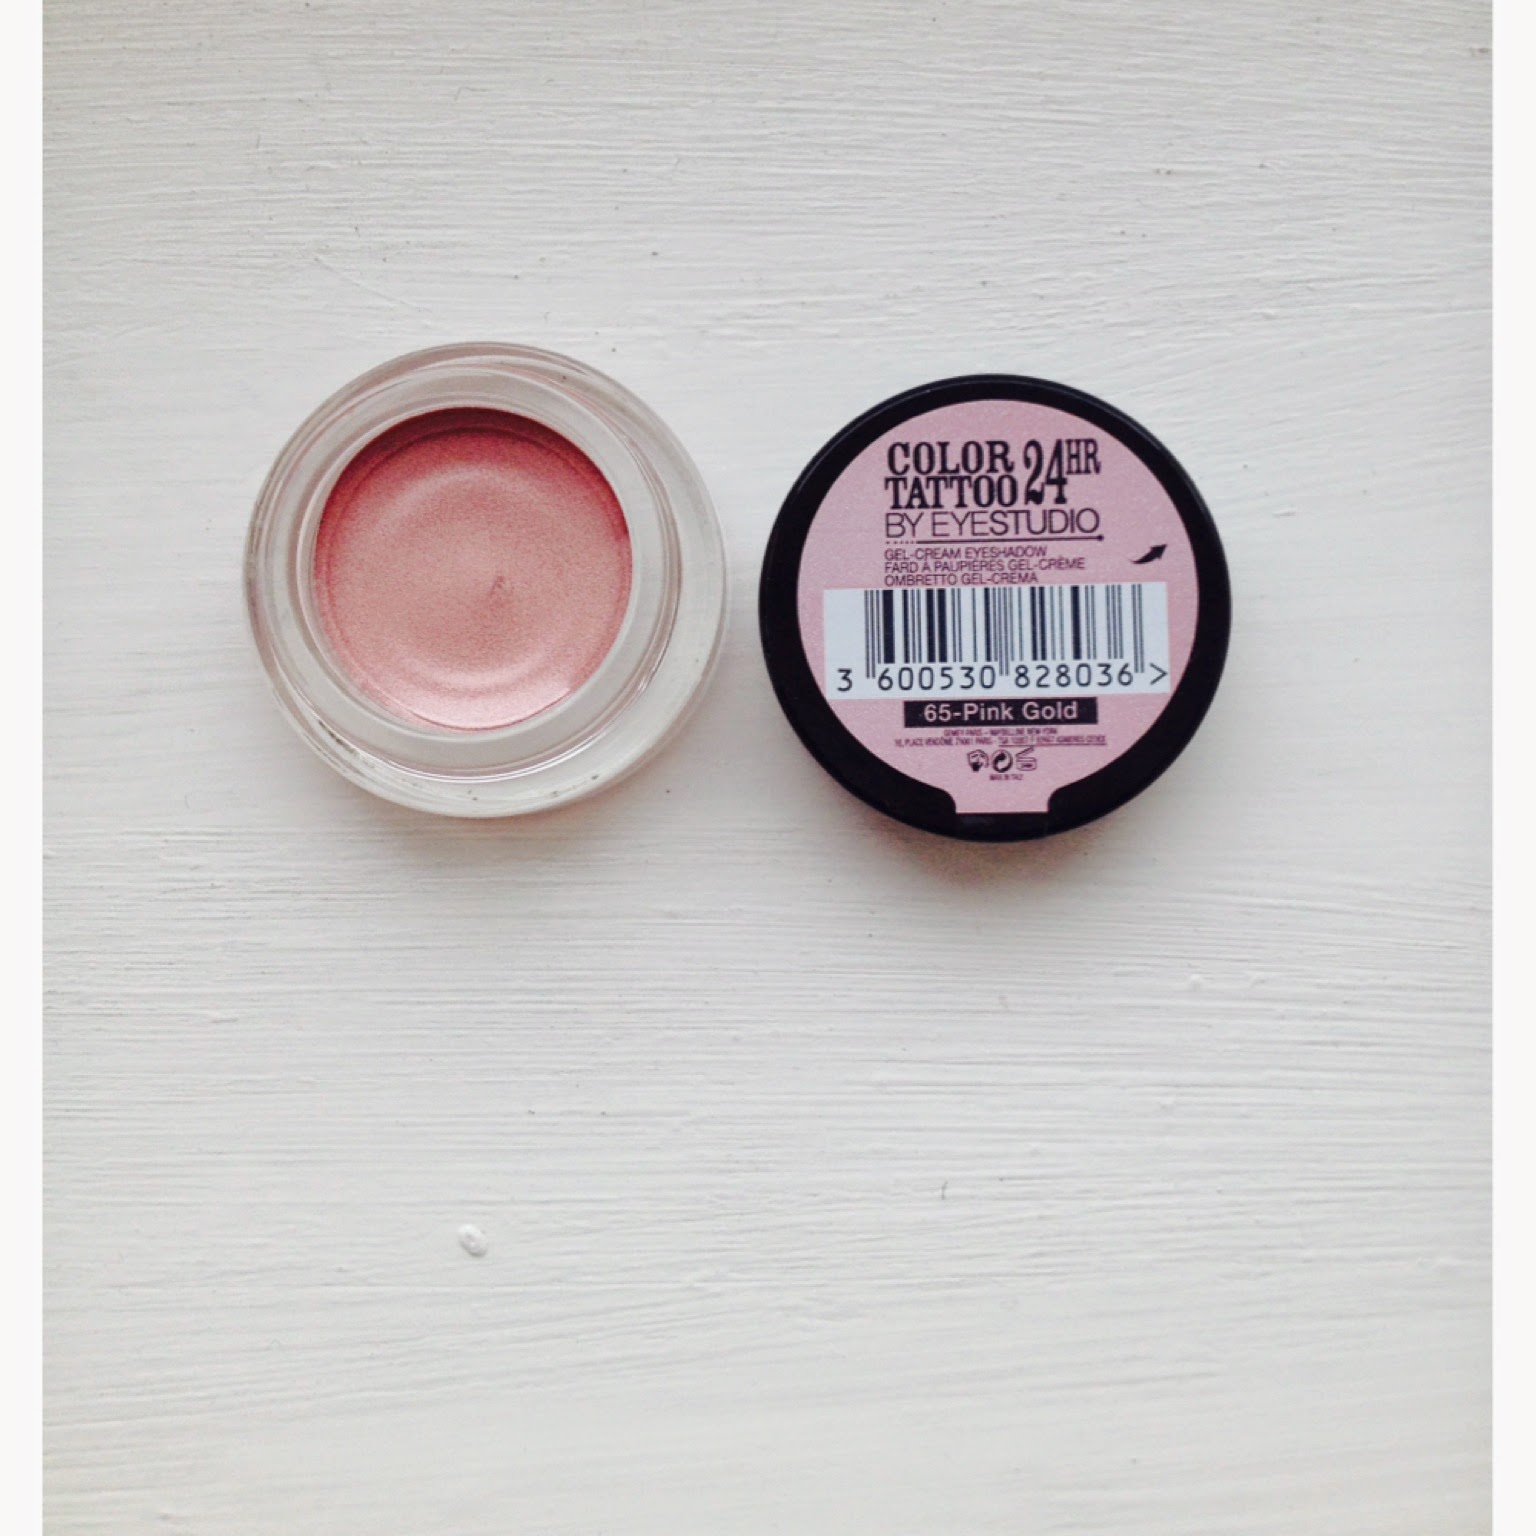 dollypiee: Maybelline 24 hour colour tattoo ~ 65 - pink gold